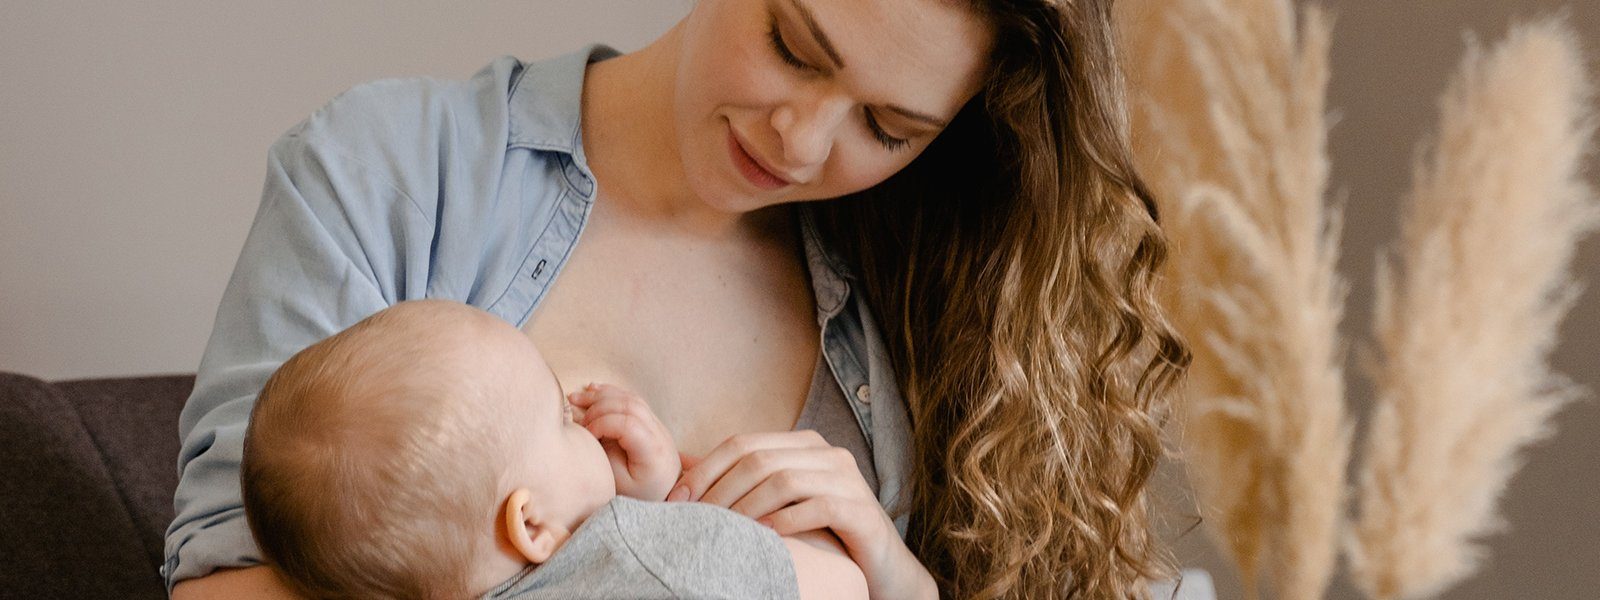 Significantly Reduce Breast Cancer Risk By Breastfeeding More Than Two Years